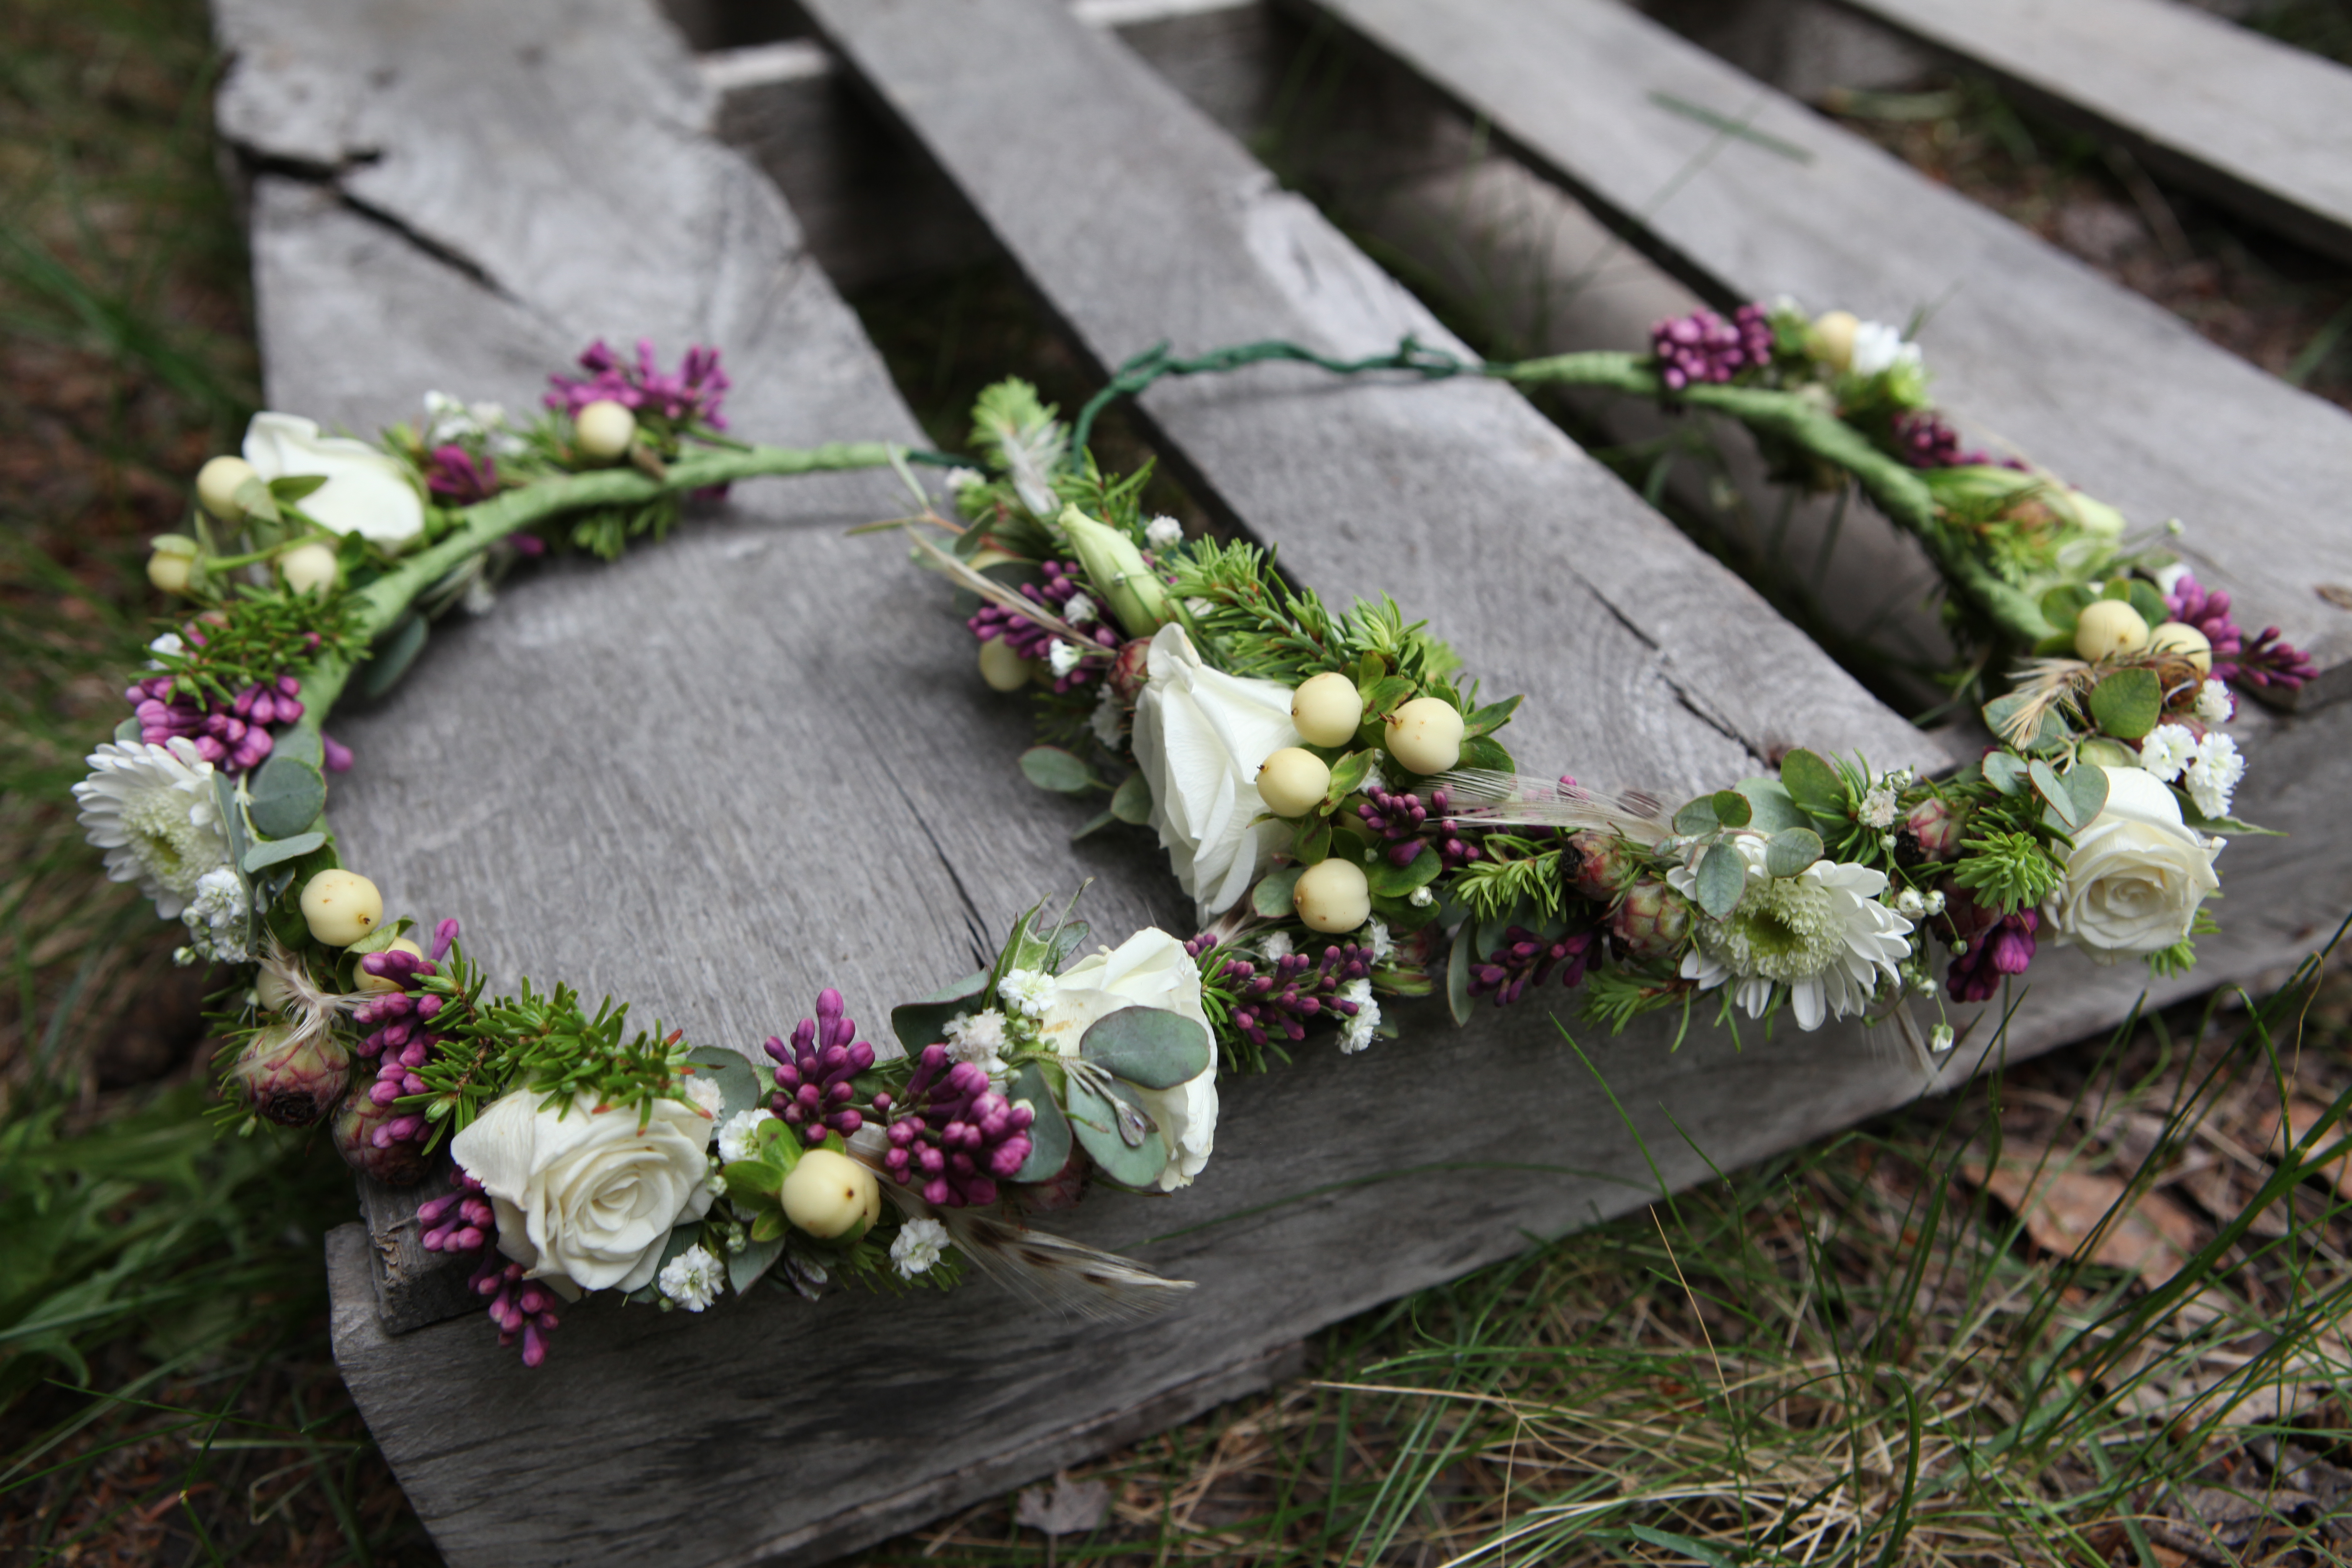 Flower crowns with lilac and spray rose | designed by Natasha Price of Paper Peony